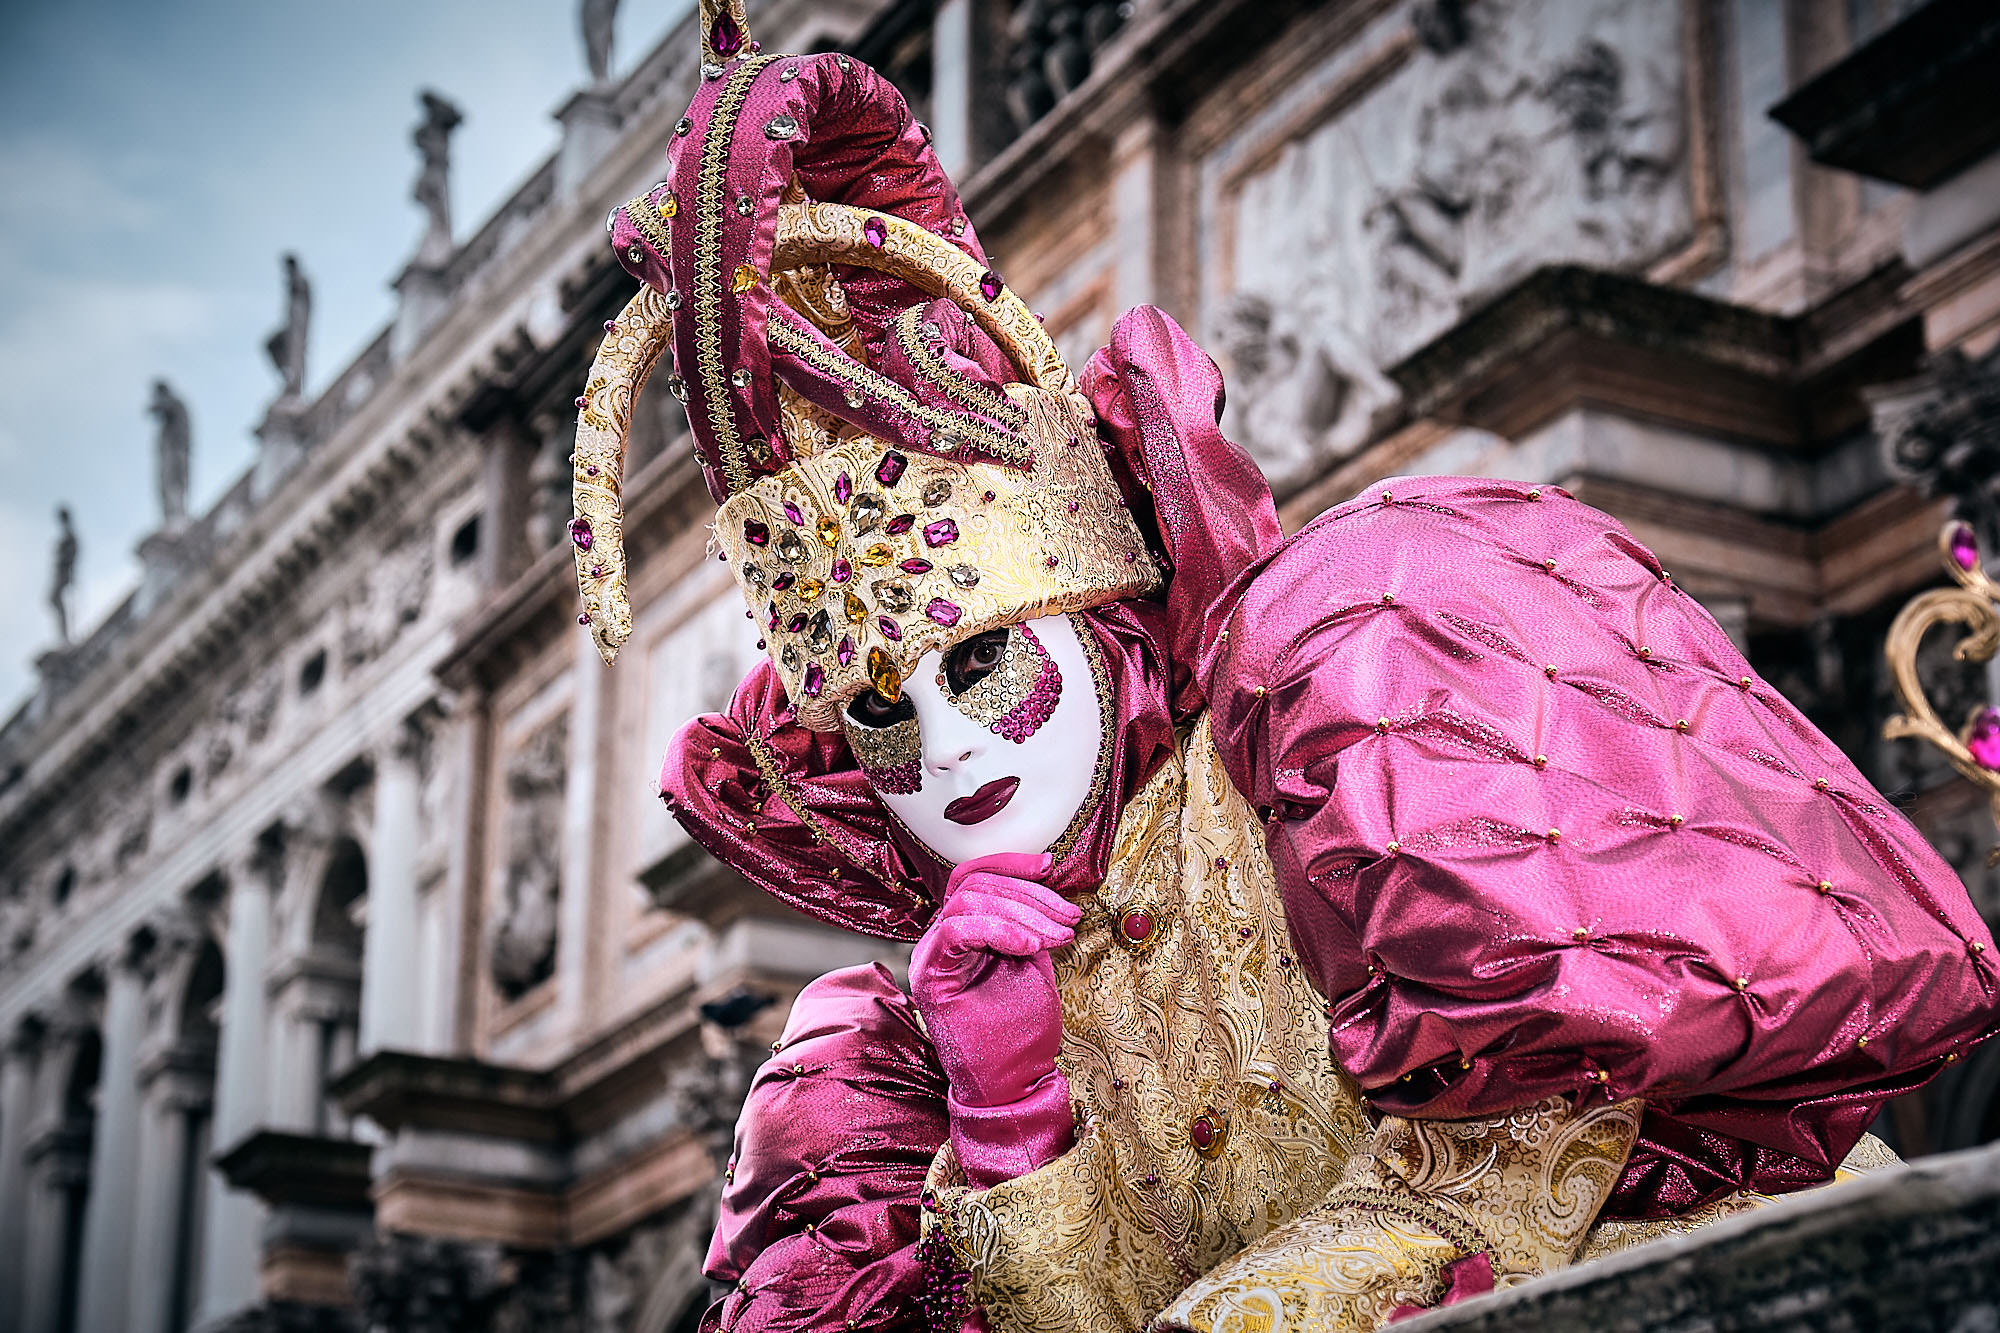 Venice Carnevale 2025: Experience the Magic – Registration Ends in August 2024